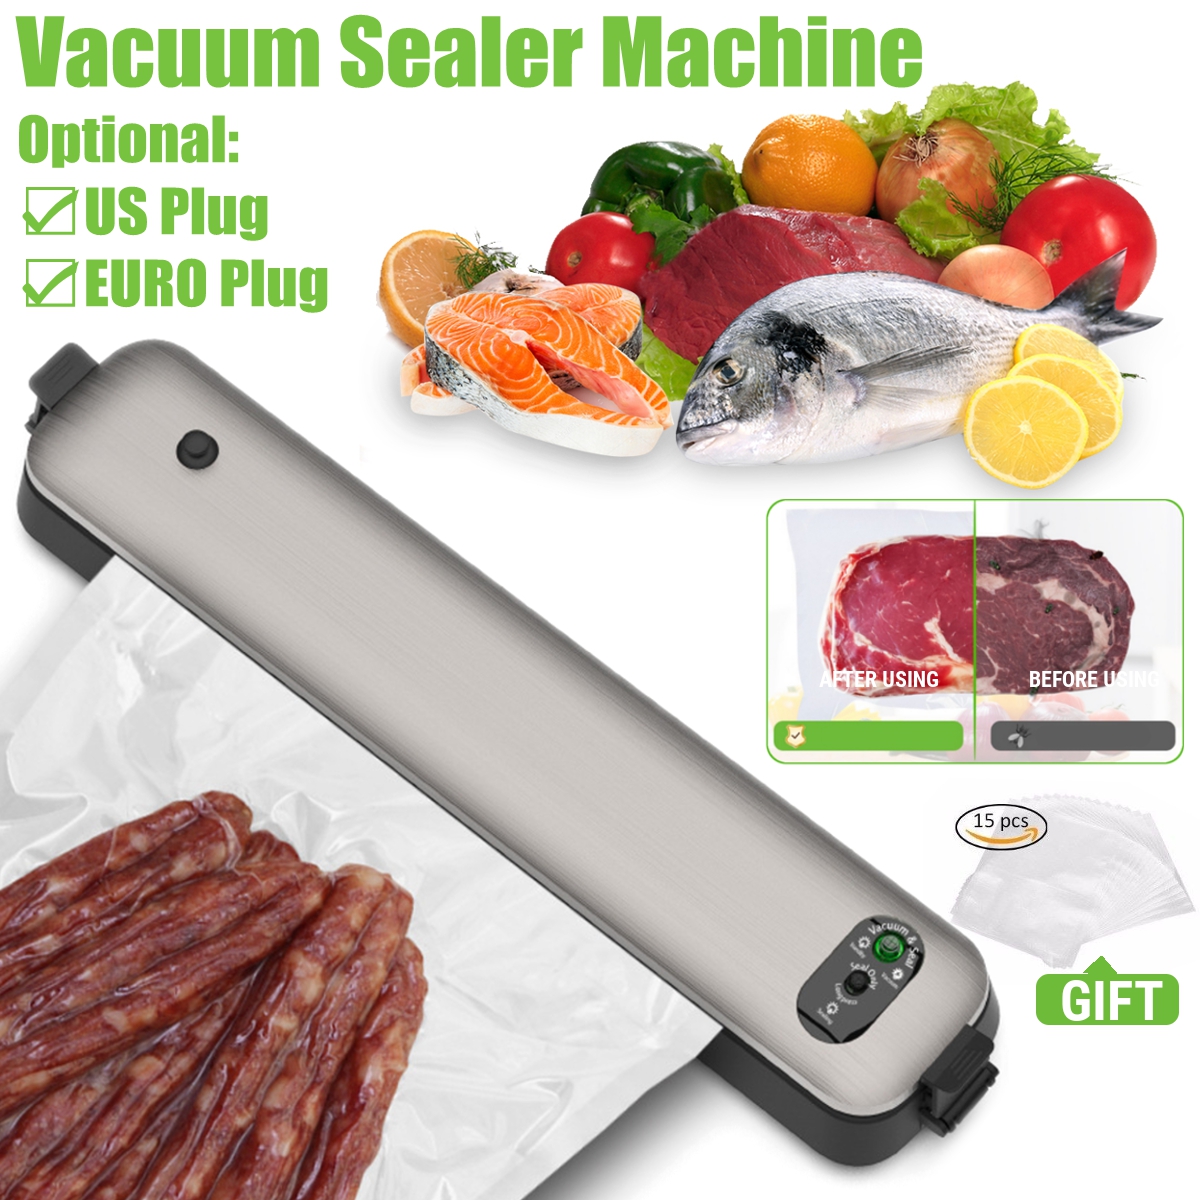 Household-Vacuum-Sealer-Machine-Seal-Meal-Food-Vacuum-Sealer-System-with-15-Free-Bags-One-Touch-Cont-1938046-1